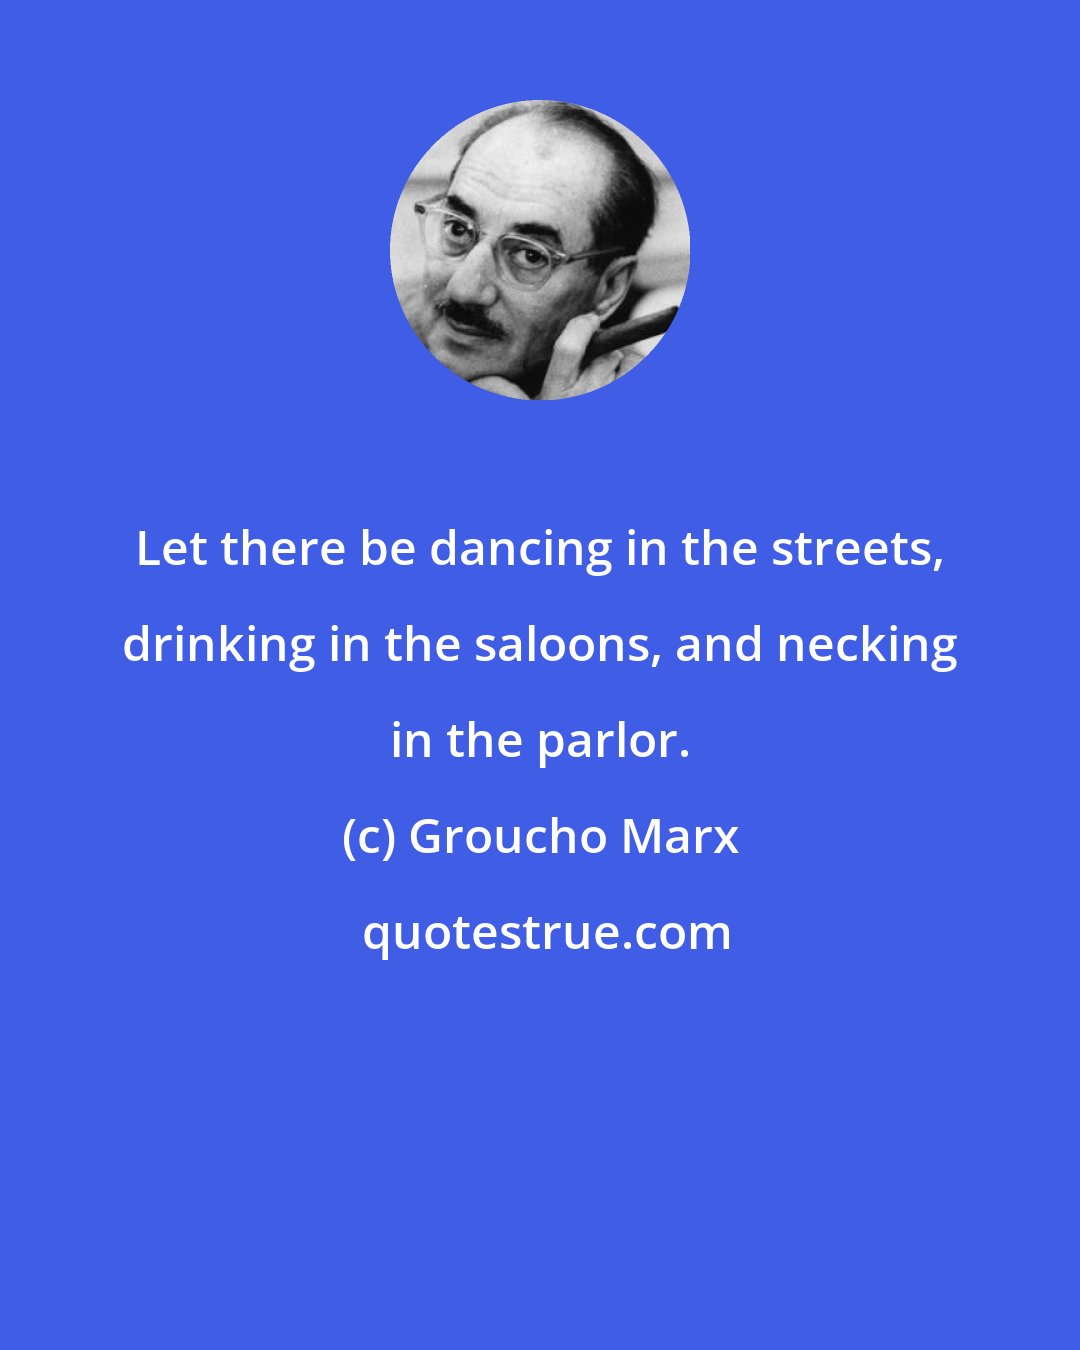 Groucho Marx: Let there be dancing in the streets, drinking in the saloons, and necking in the parlor.